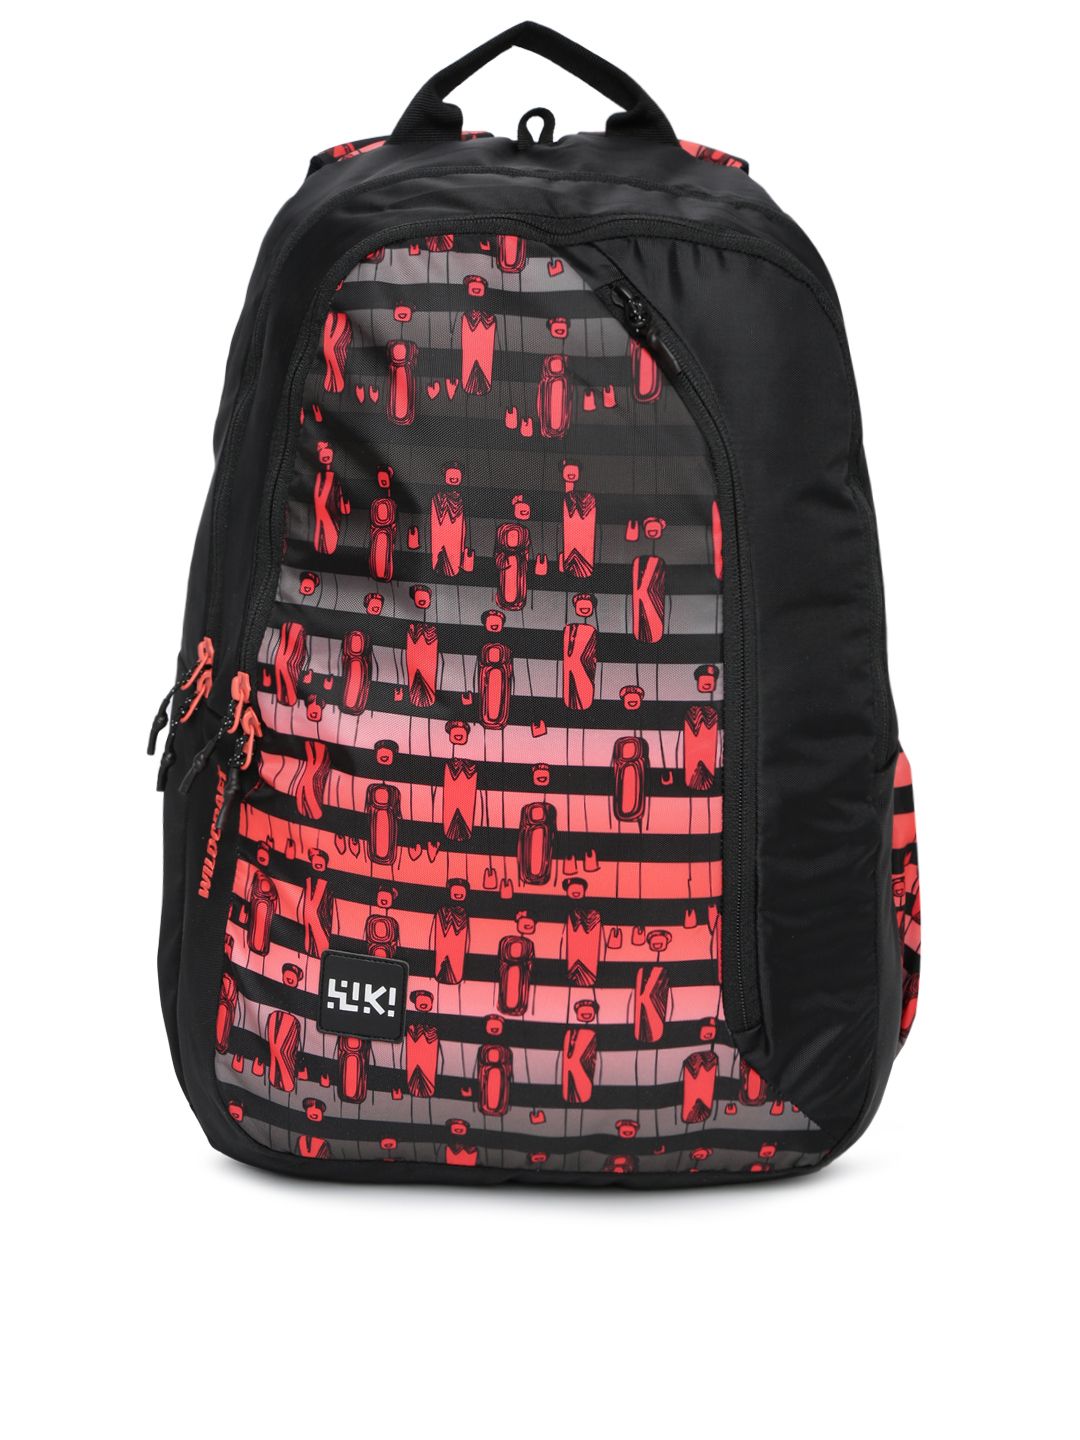 Wildcraft Unisex Black & Red Graphic Printed Backpack Price in India